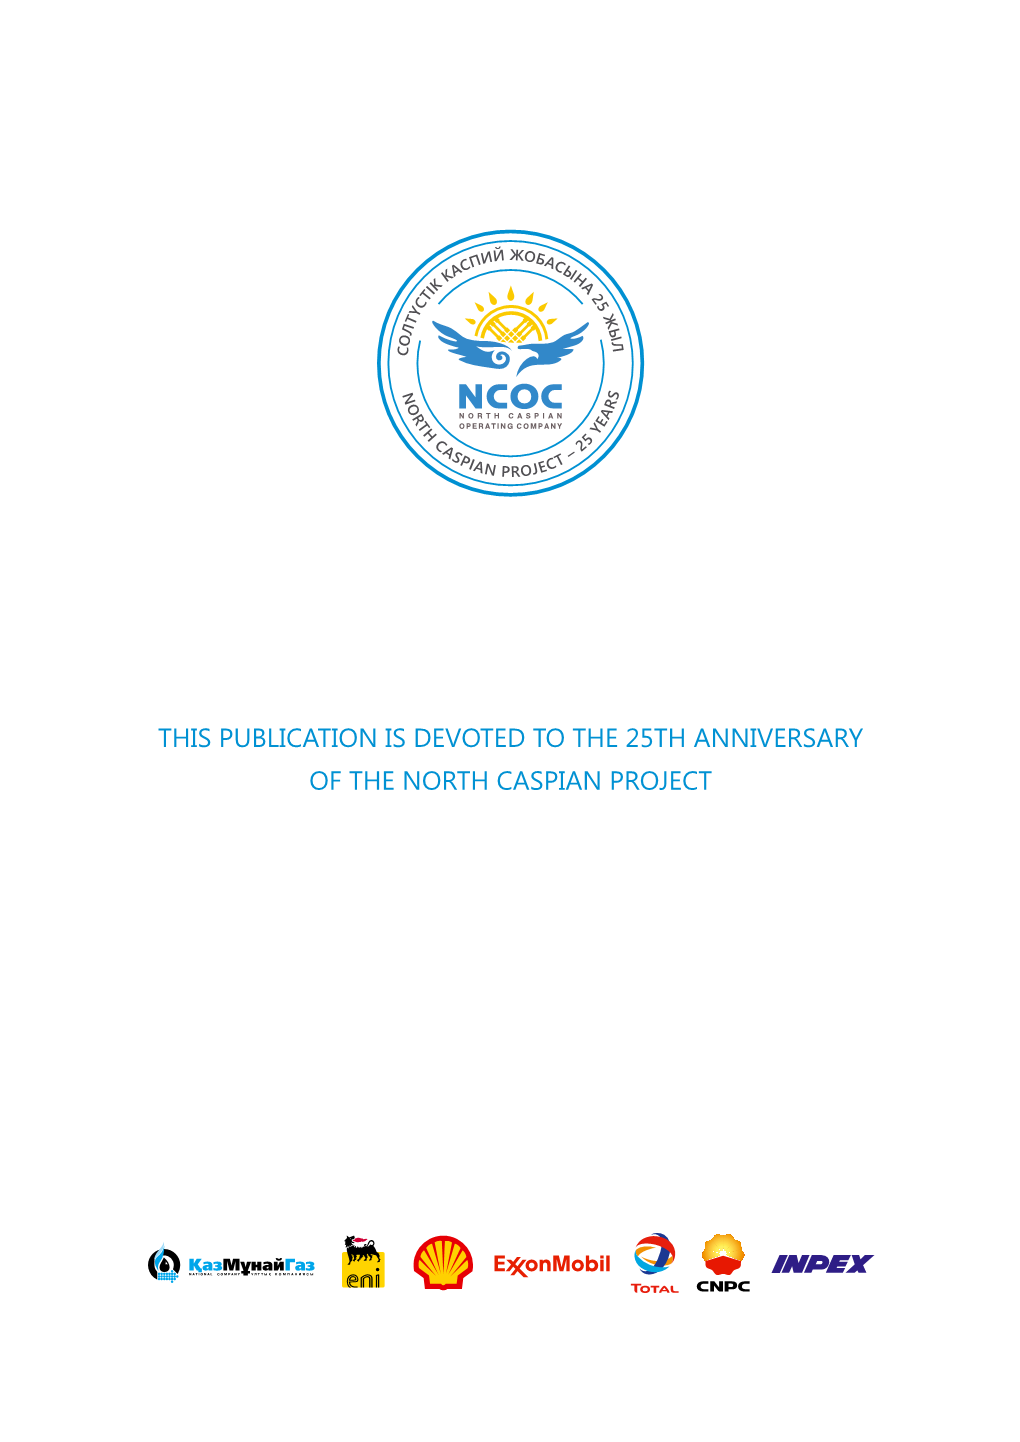 This Publication Is Devoted to the 25Th Anniversary of the North Caspian Project Udc 502.51(035.3) Bbc 20.1 E40